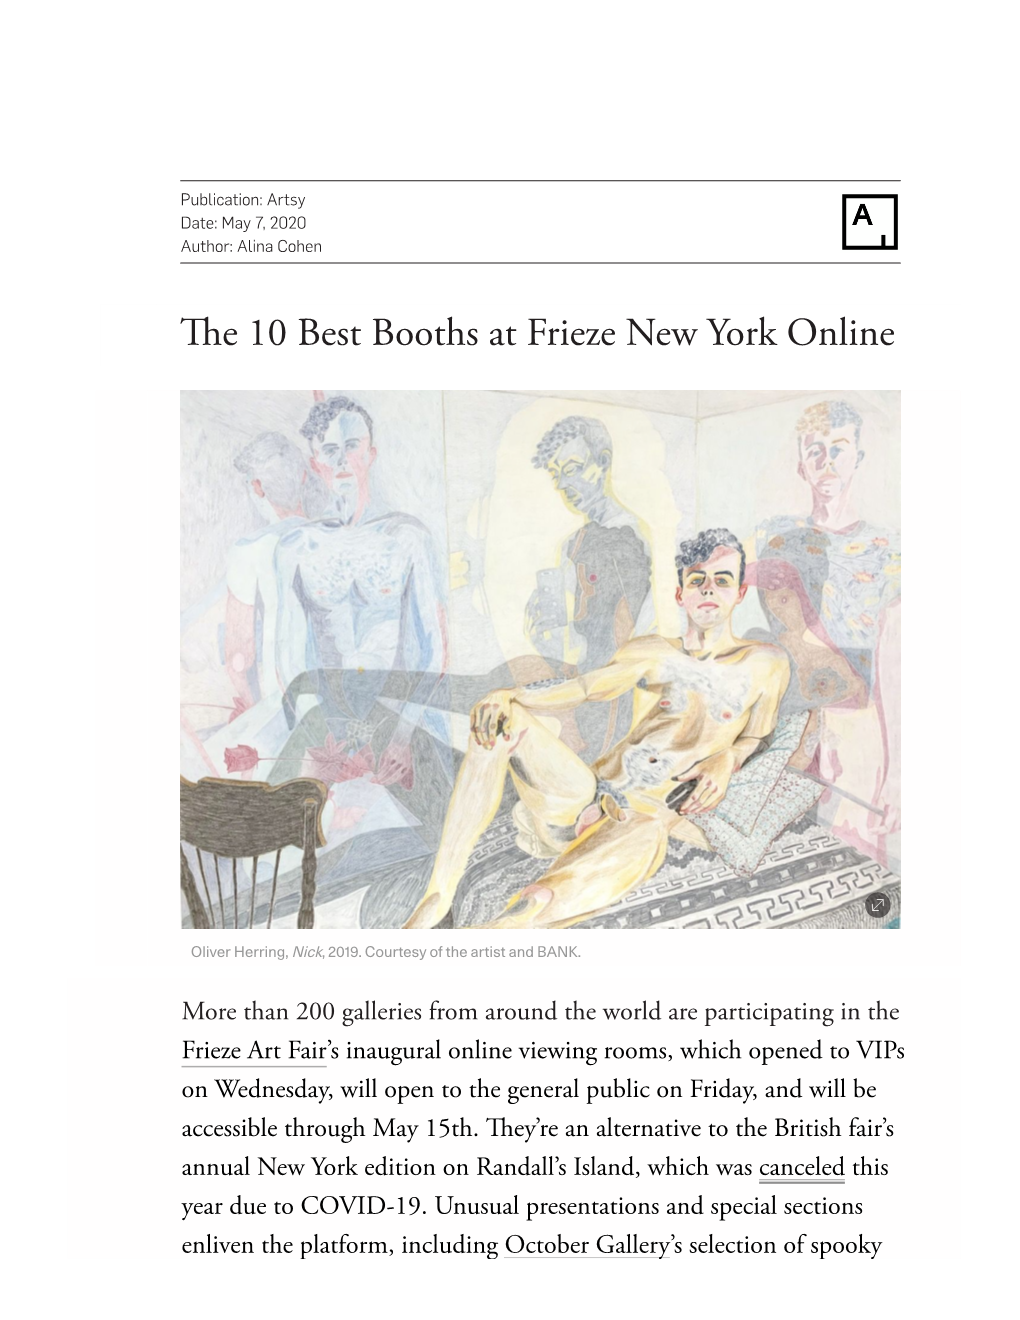 E 10 Best Booths at Frieze New York Online 2020 - Artsy